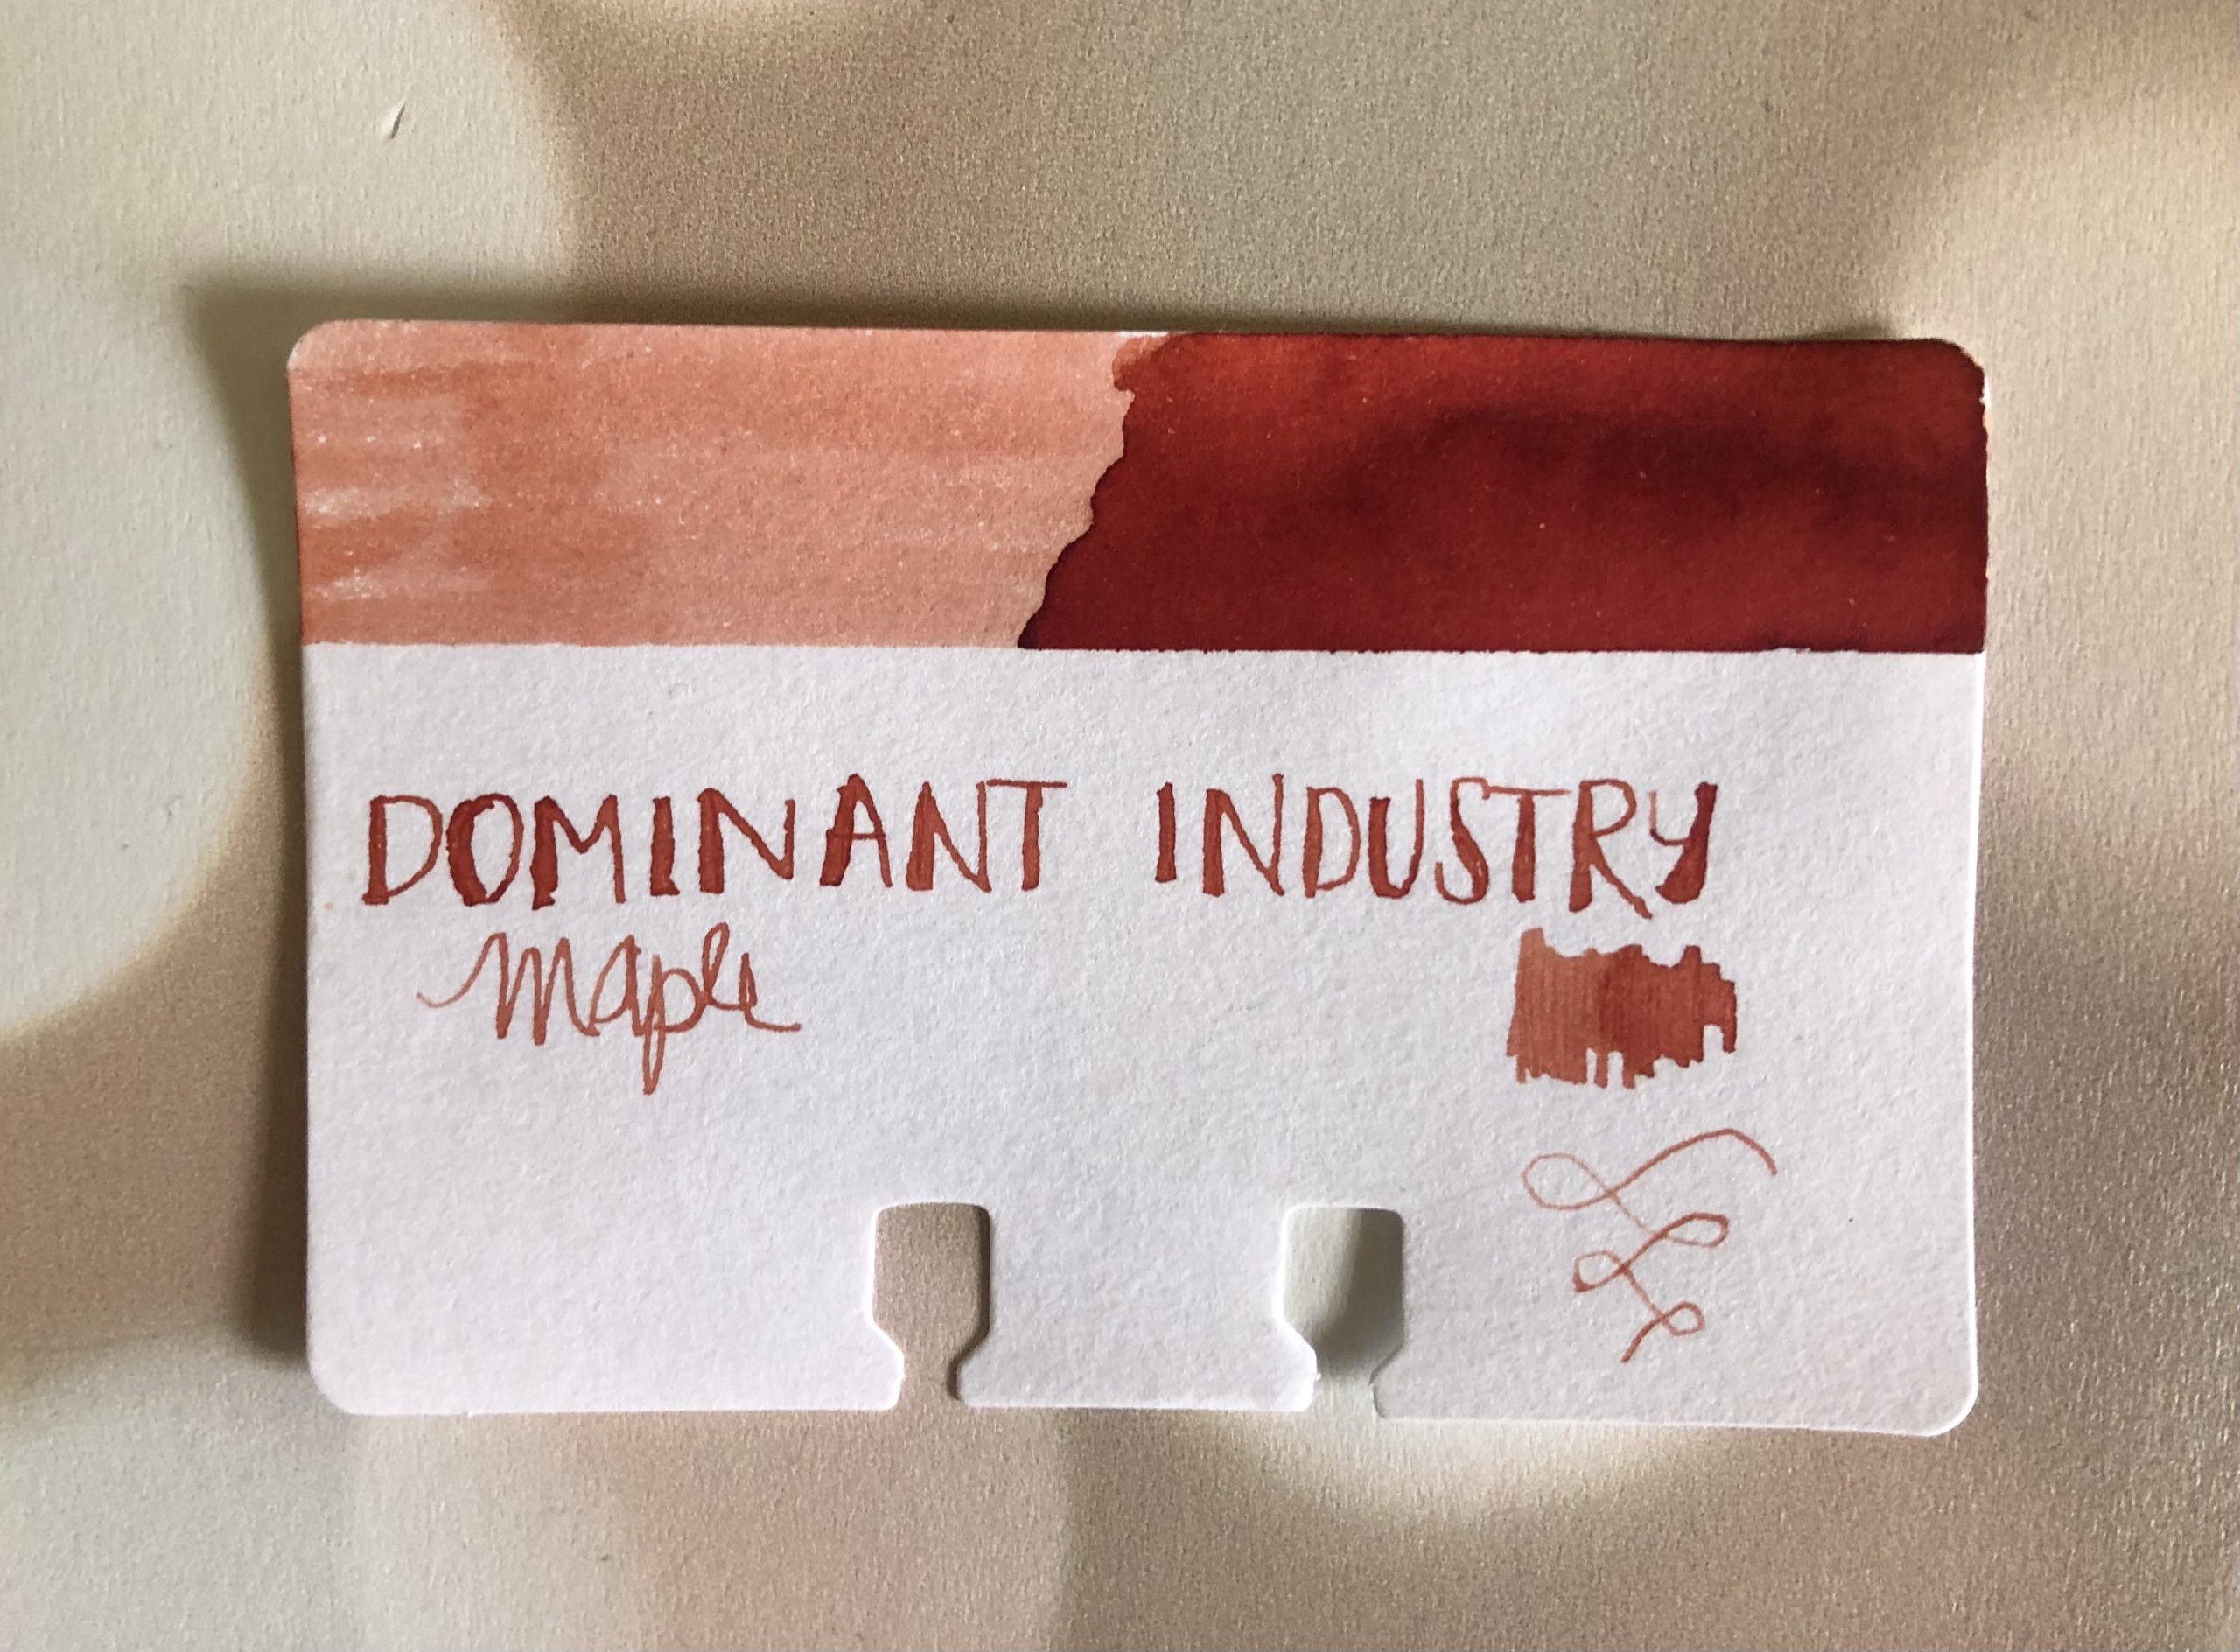 Ink Review: Dominant Industry Maple - The Well-Appointed Desk